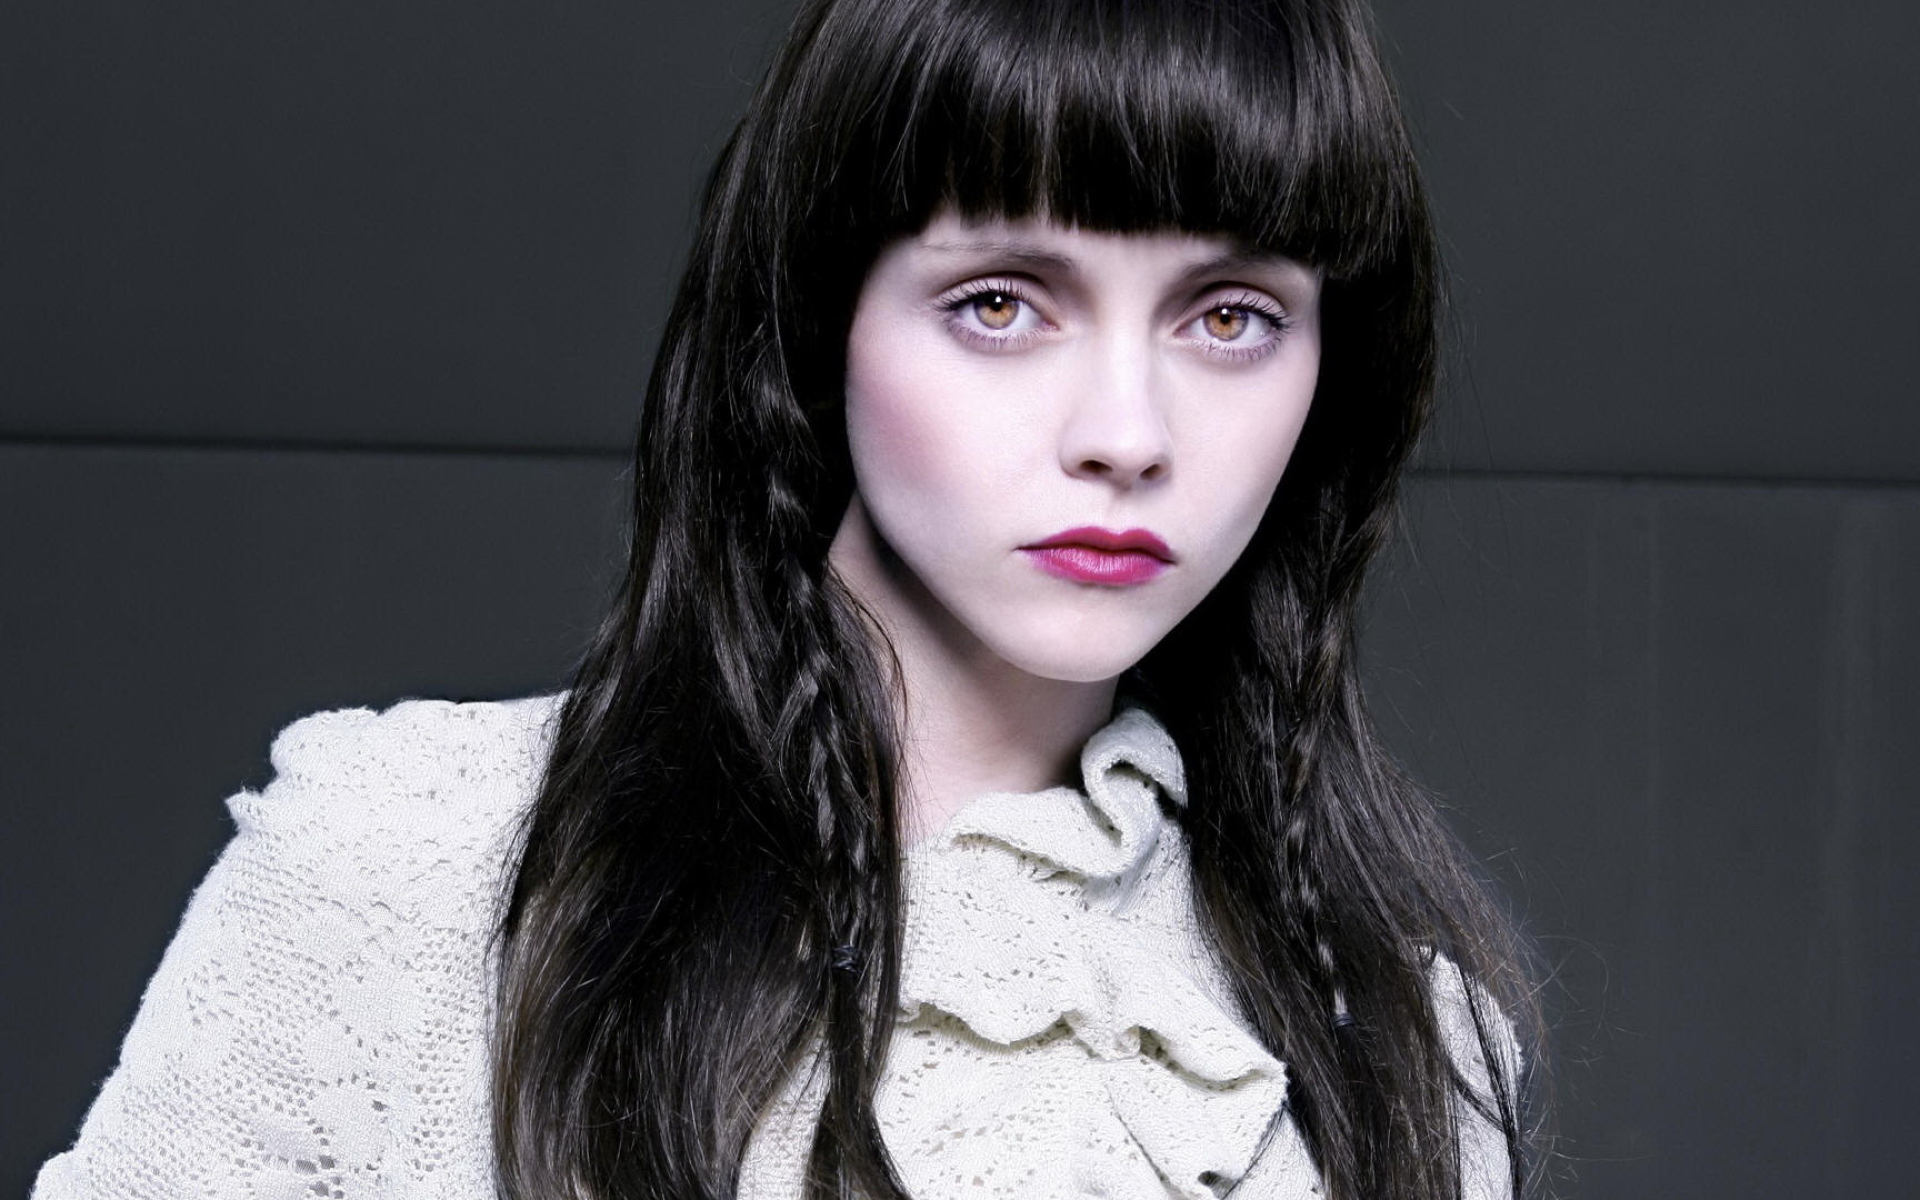 Christina Ricci: Appeared in the comedy horror series Wednesday as Marilyn Thornhill. 1920x1200 HD Background.